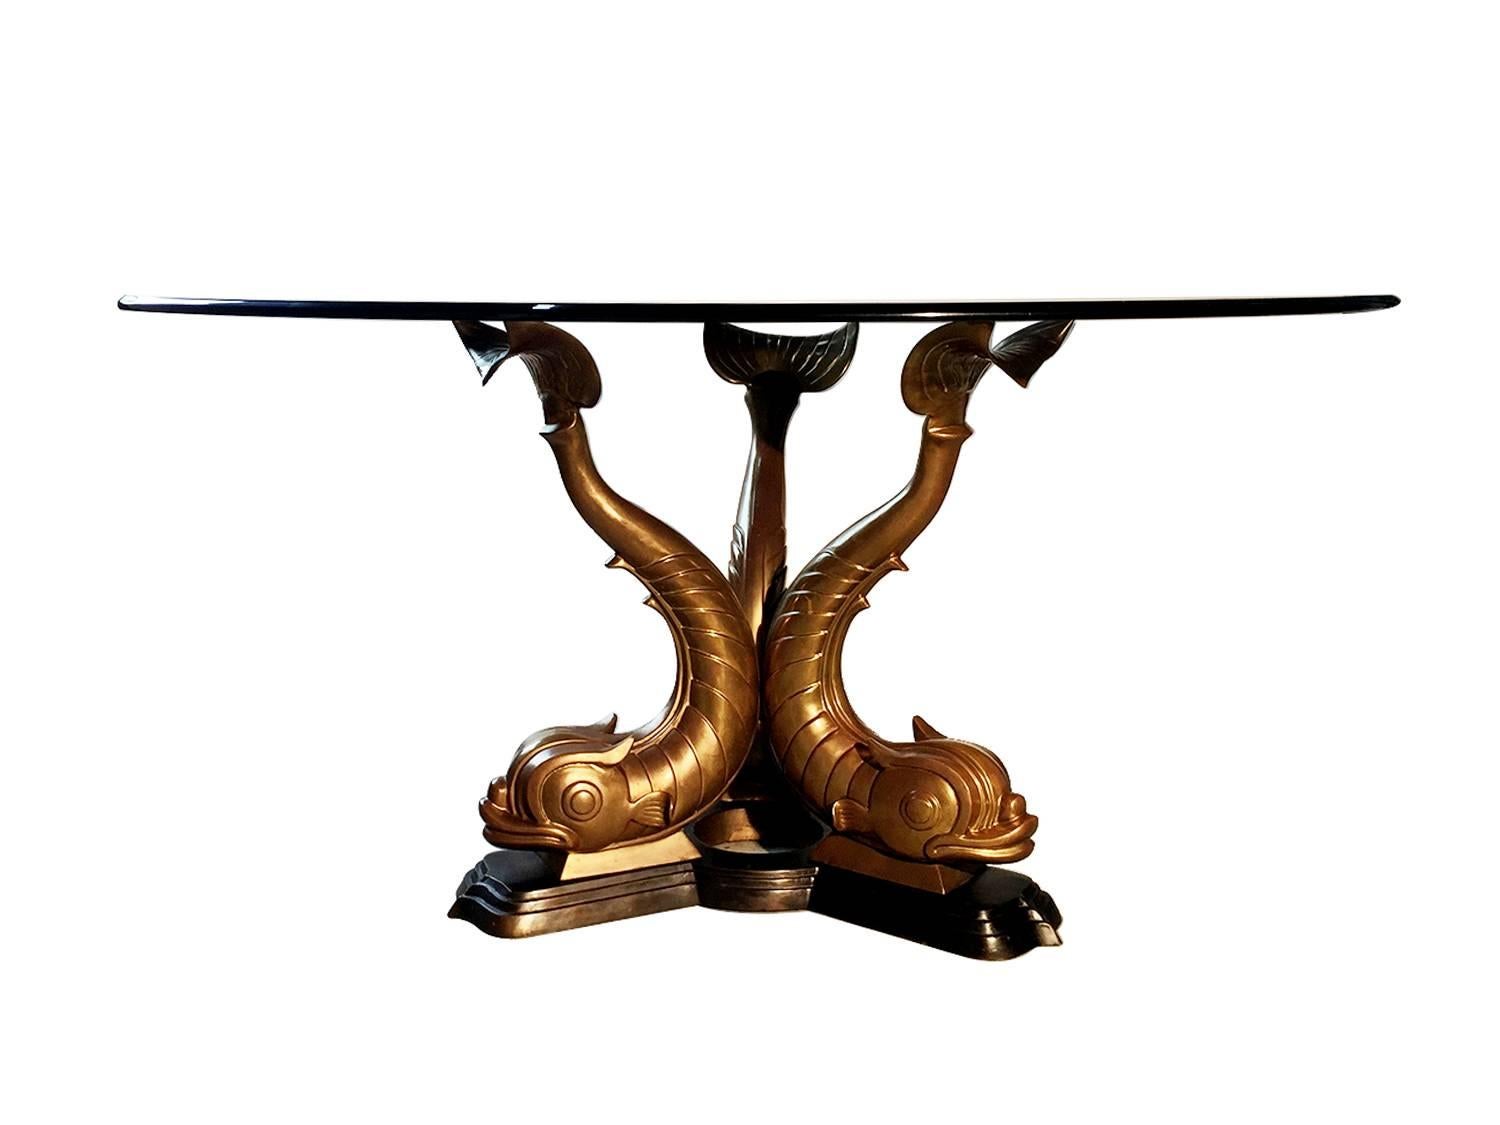 Great midcentury bronze triple dolphin base table,
Has 60” glass top but you can put a smaller or larger glass or marble top if you like.
A heavy bronze nicely cast base.